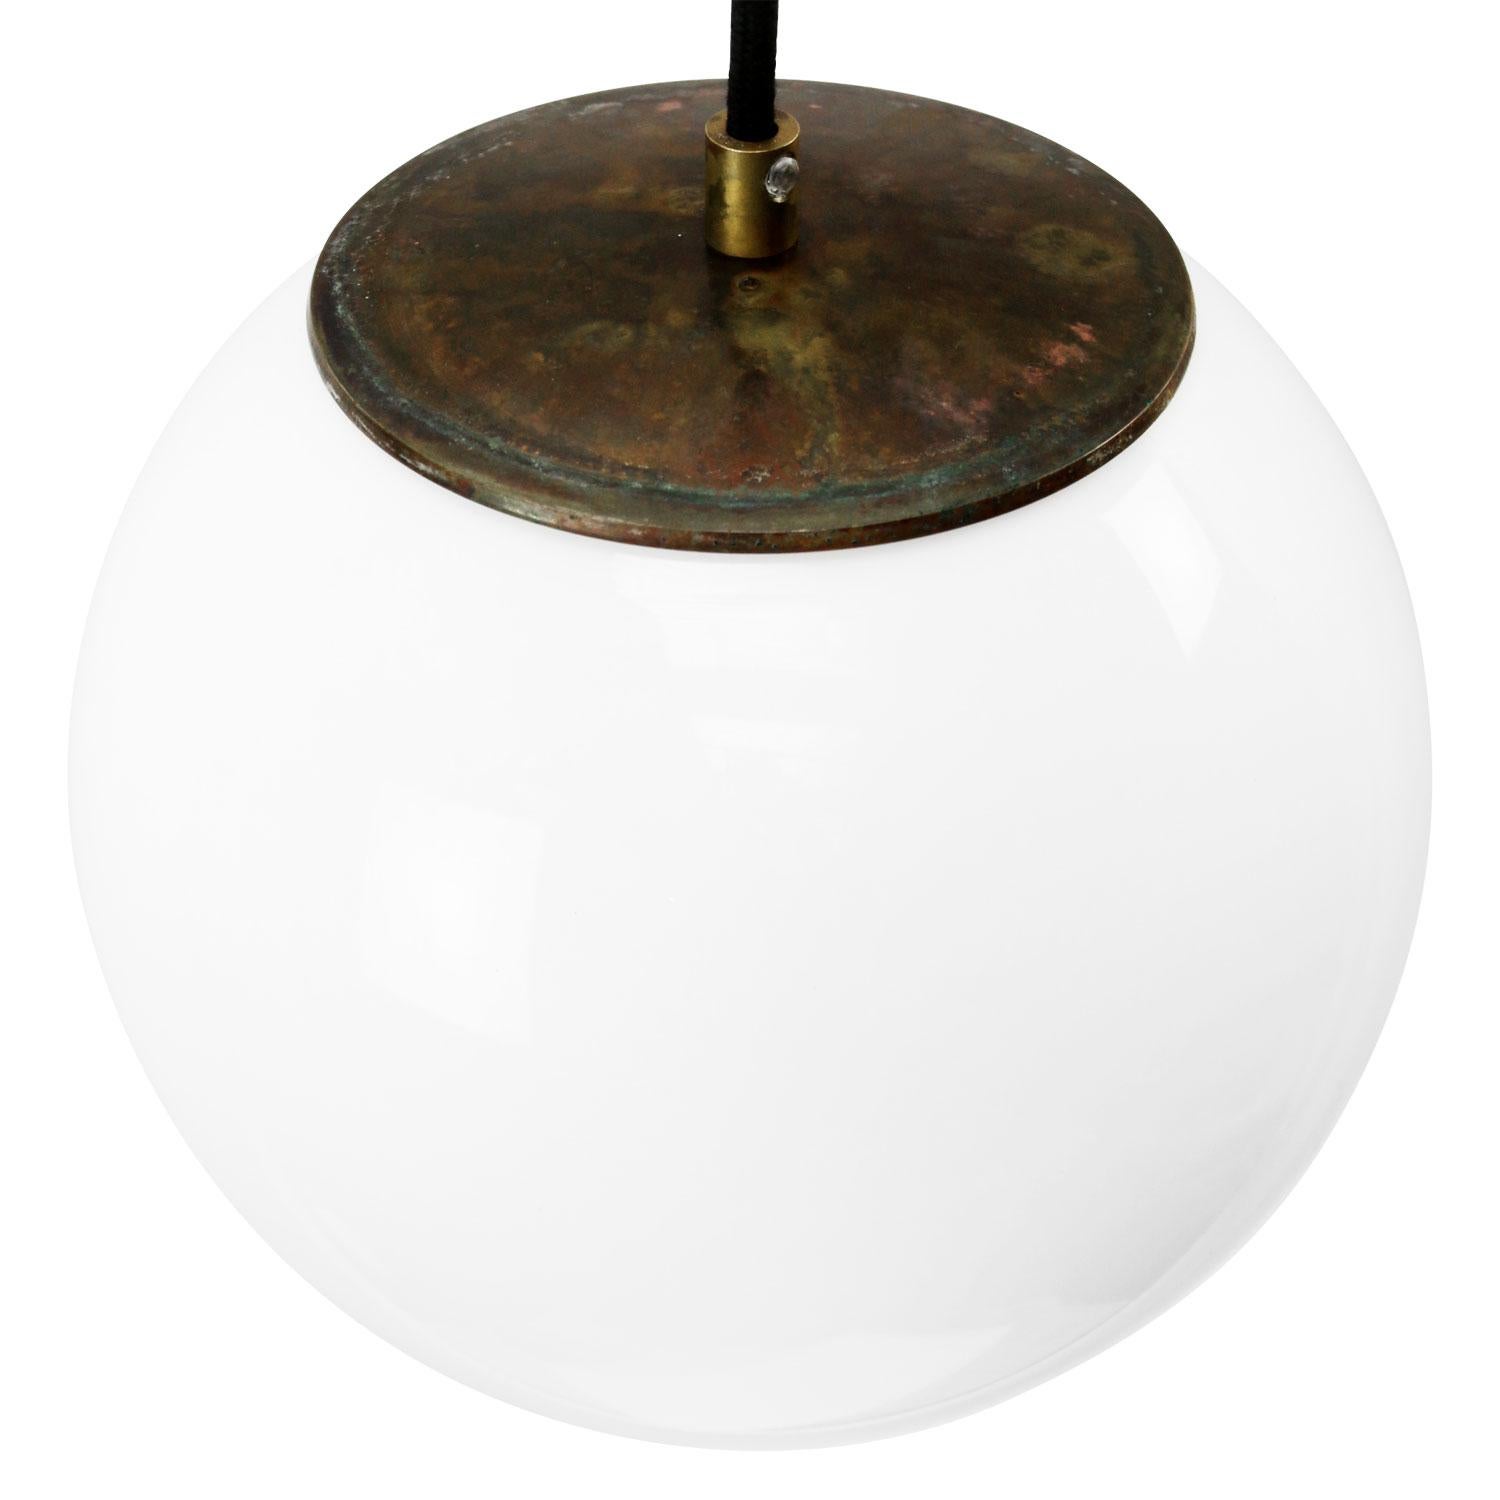 Opaline glass pendant
2 meter black cotton flex
brass top.

Weight: 2.00 kg / 4.4 lb

Priced per individual item. All lamps have been made suitable by international standards for incandescent light bulbs, energy-efficient and LED bulbs.